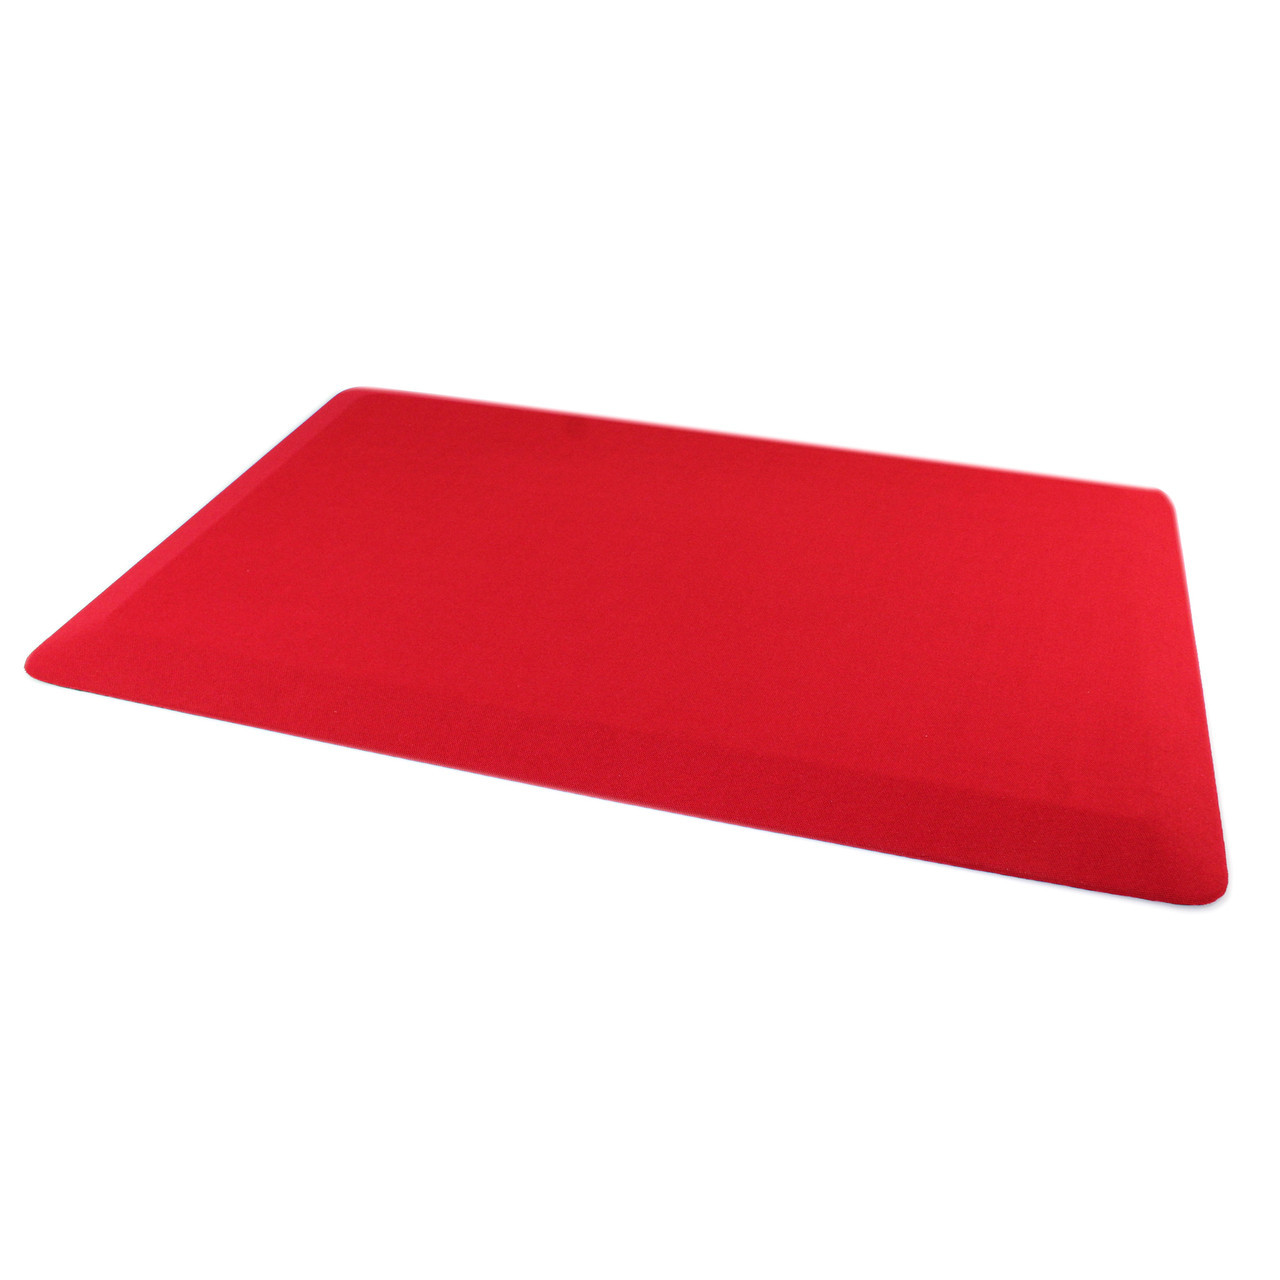 https://cdn11.bigcommerce.com/s-fjwps1jbkv/images/stencil/original/products/161/3207/ultralux-premium-anti-fatigue-floor-comfort-mat-or-durable-ergonomic-multi-purpose-non-slip-standing-support-pad-or-34-thick-or-red__65202.1688989593.jpg?c=2